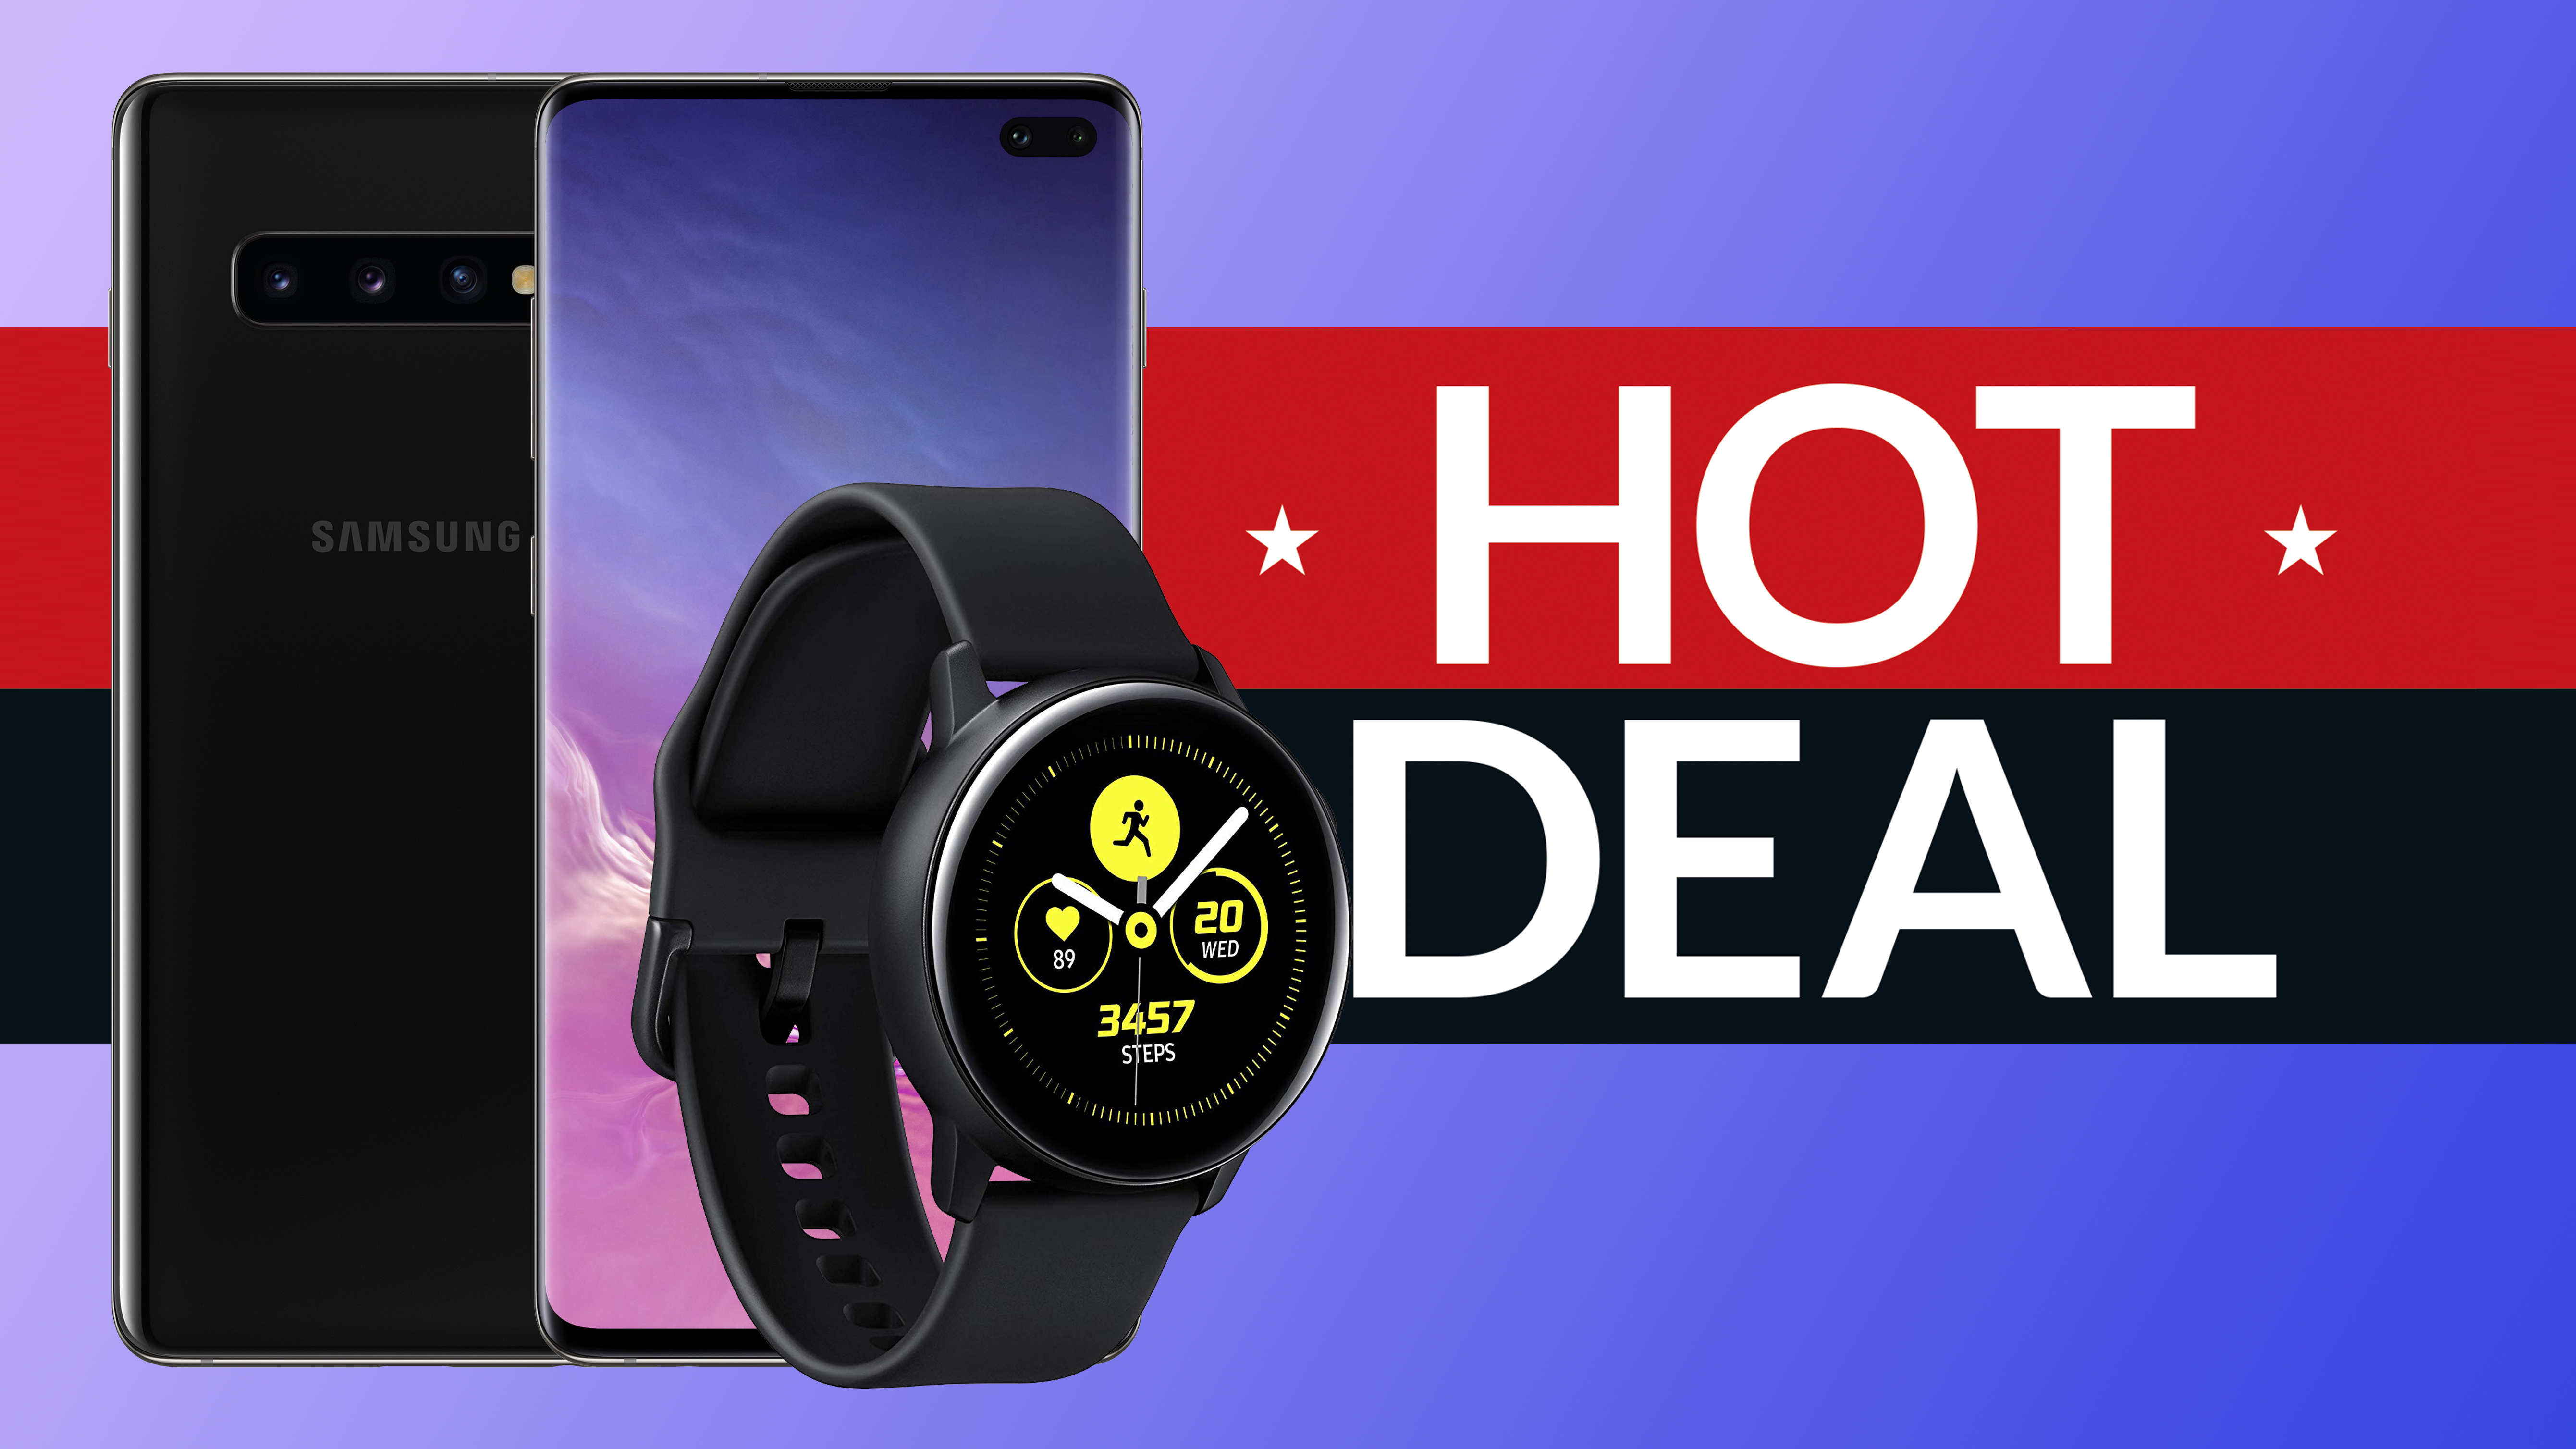 galaxy s10 and watch deals